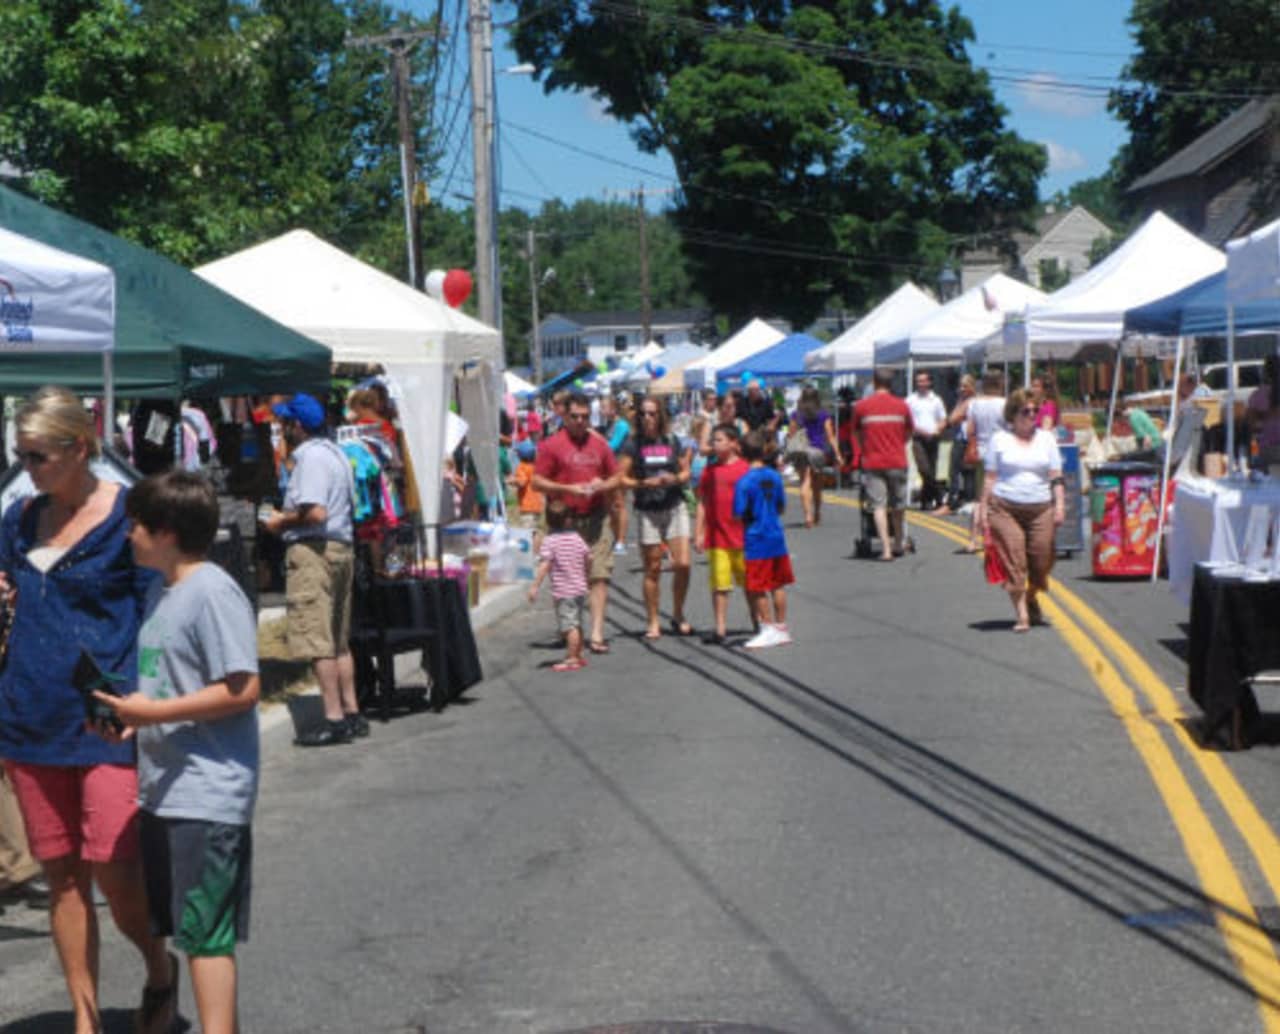 Hundreds of people will gather along Main Street in Georgetown for the annual Georgetown Day Festival this Sunday.